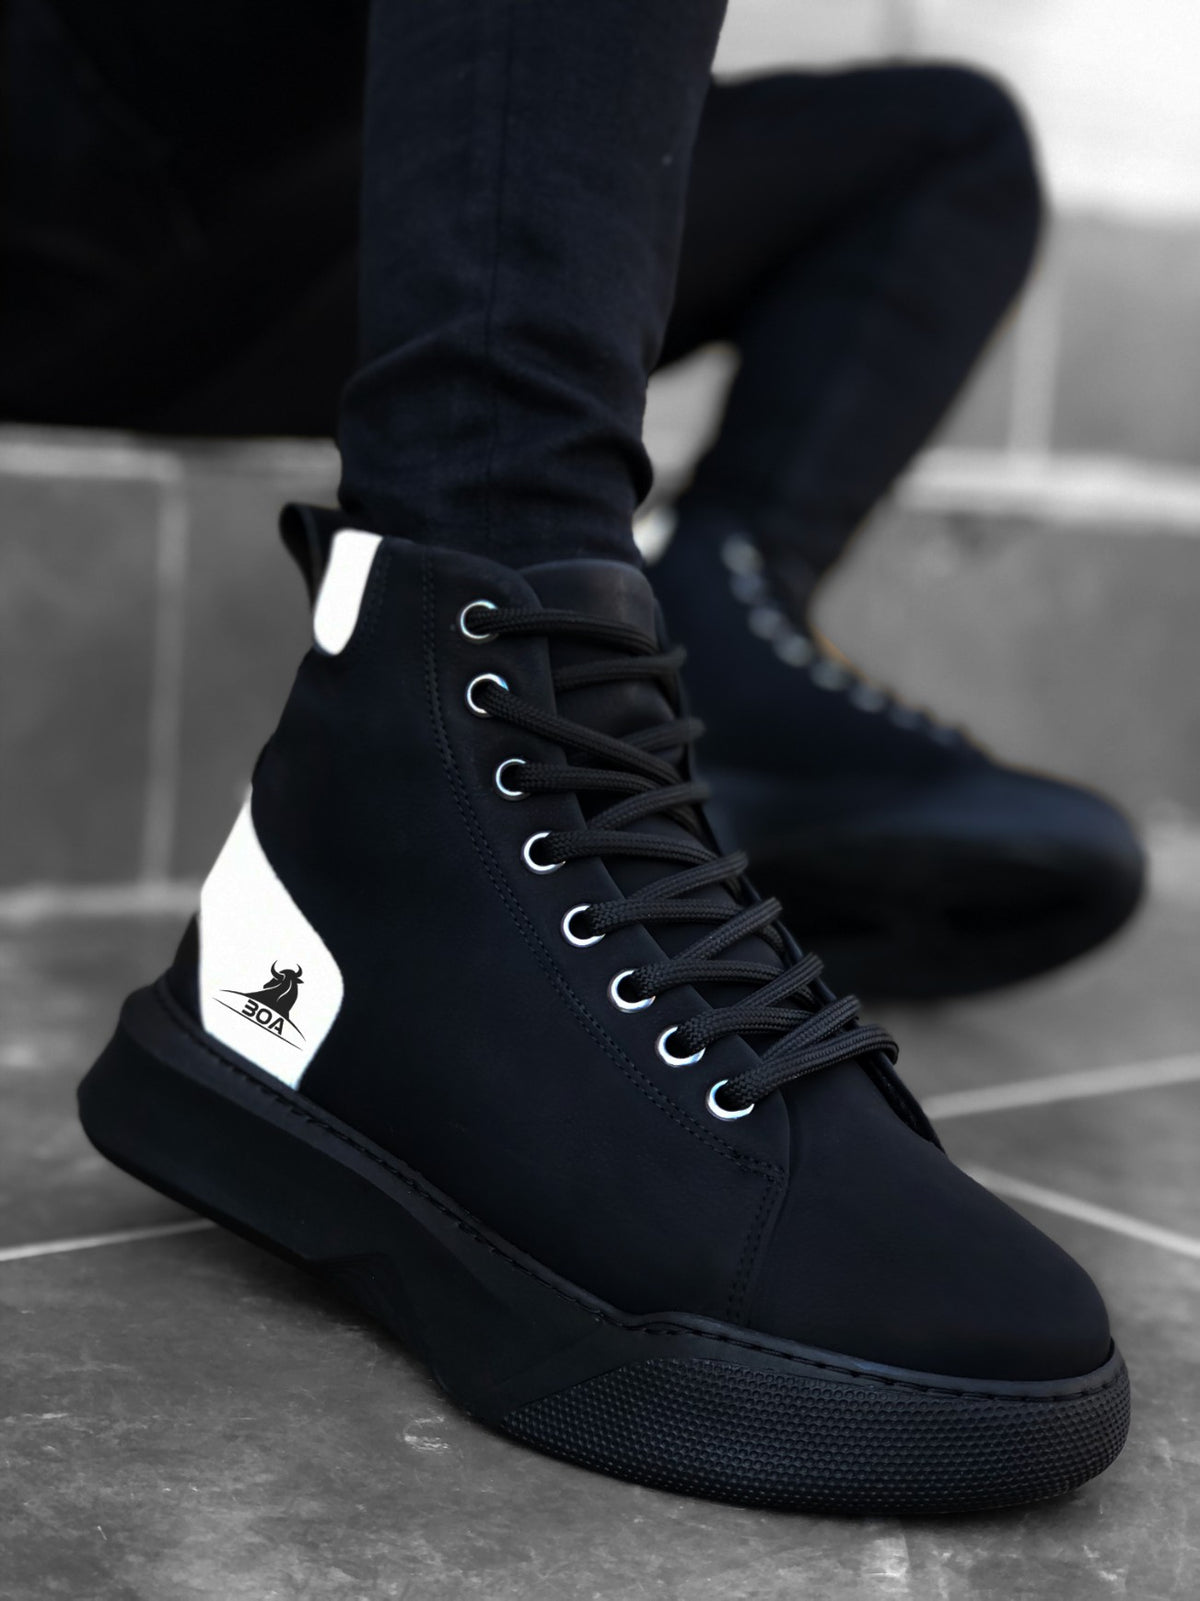 BA0155 Lace-Up Men's High Sole Black White Sport Boots - STREETMODE ™